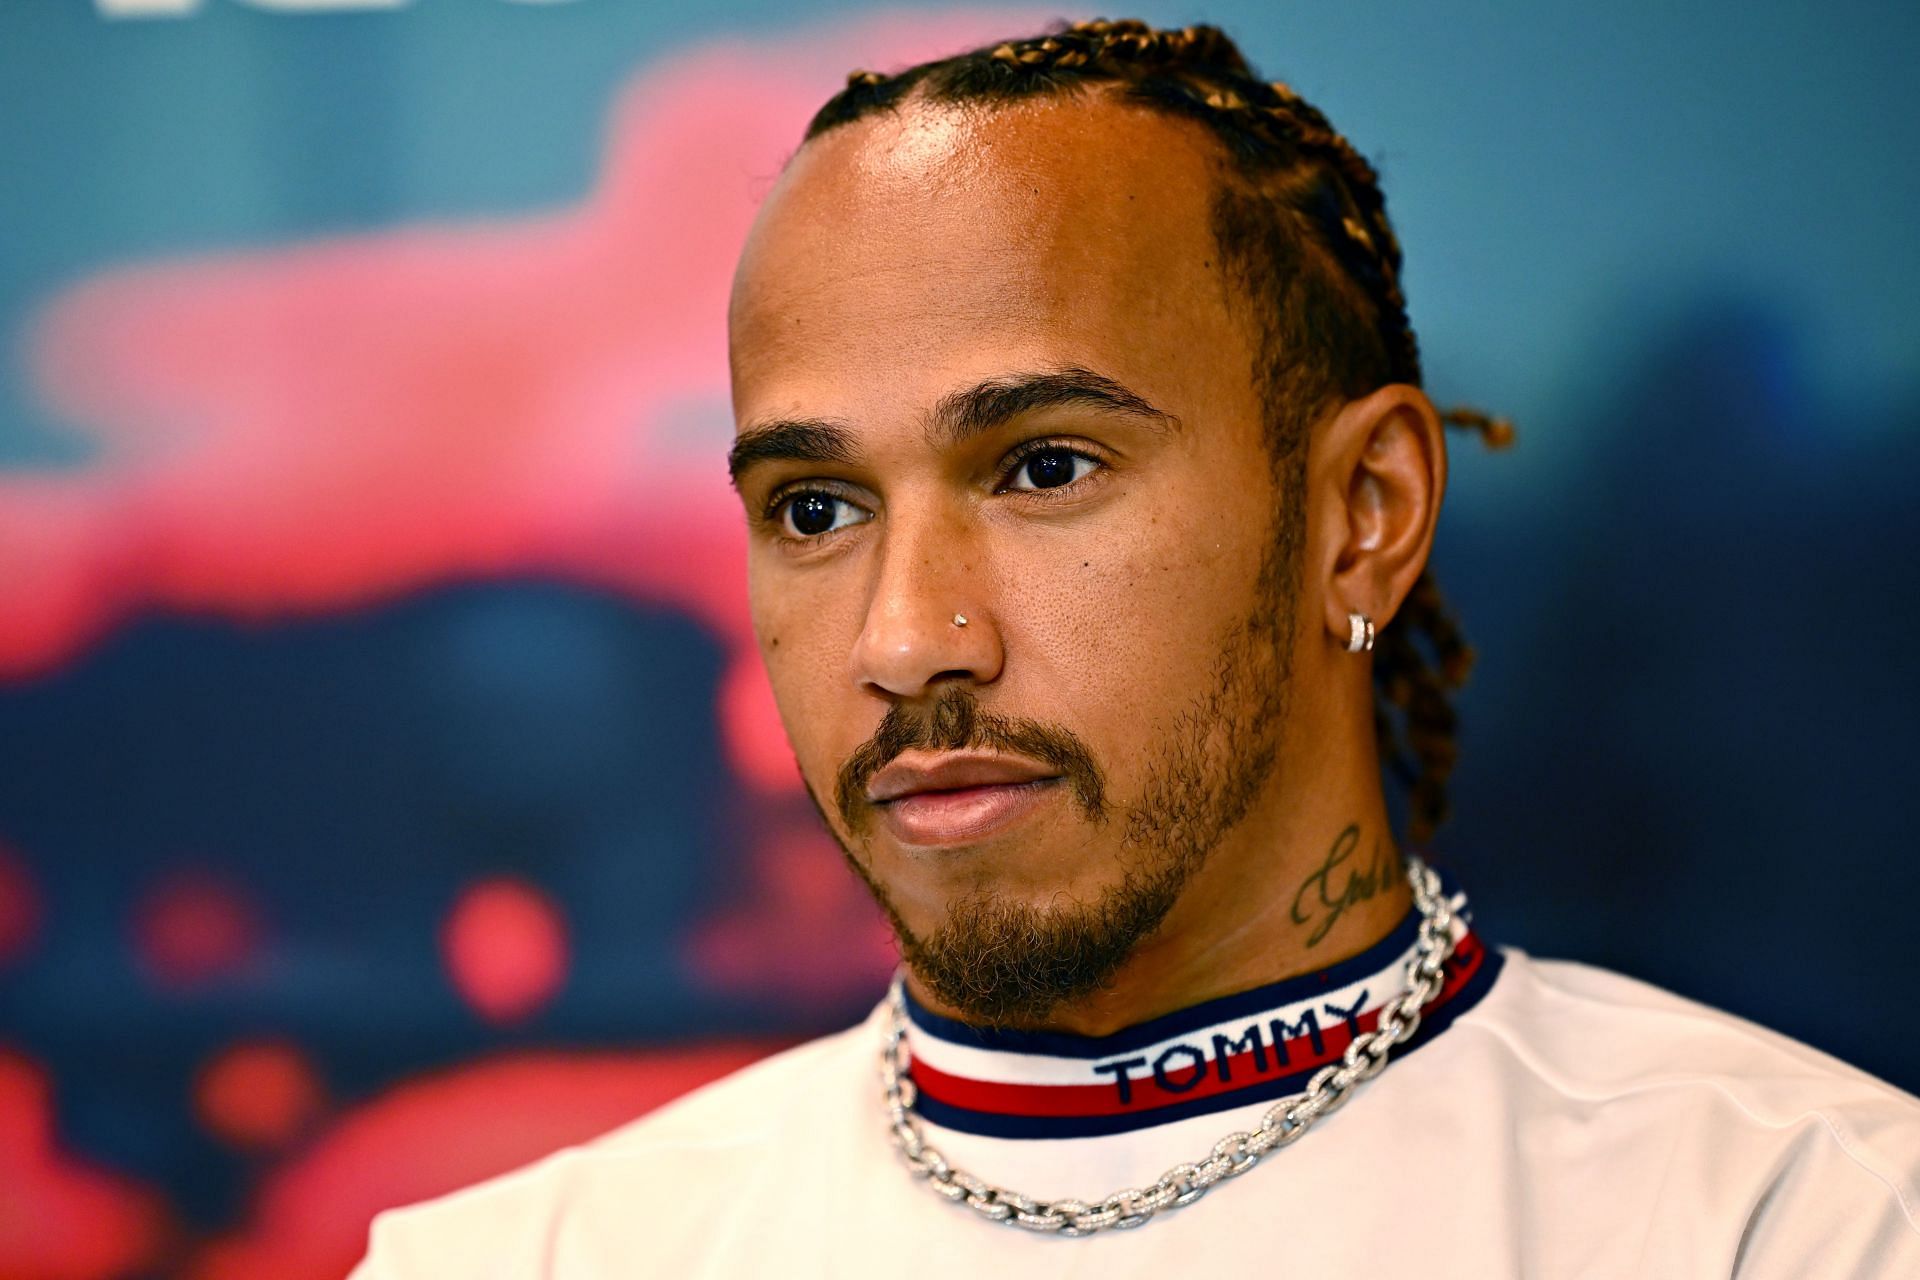 Lewis Hamilton is not sure if he can be a title contender this season